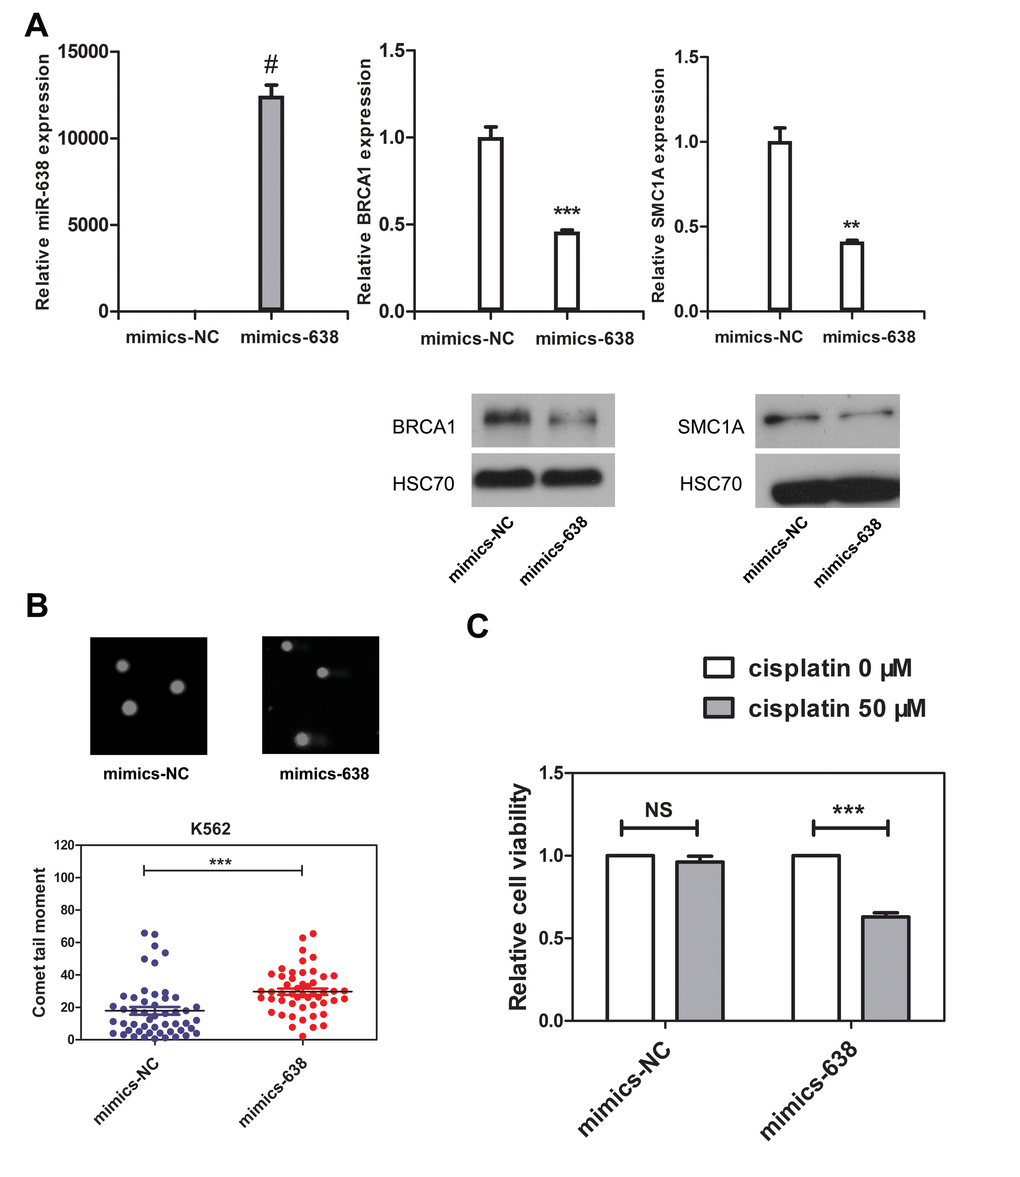 The overexpression of miR-638 in K562 cells impedes DNA damage repair ability and increases the cellular sensitivity to cisplatin